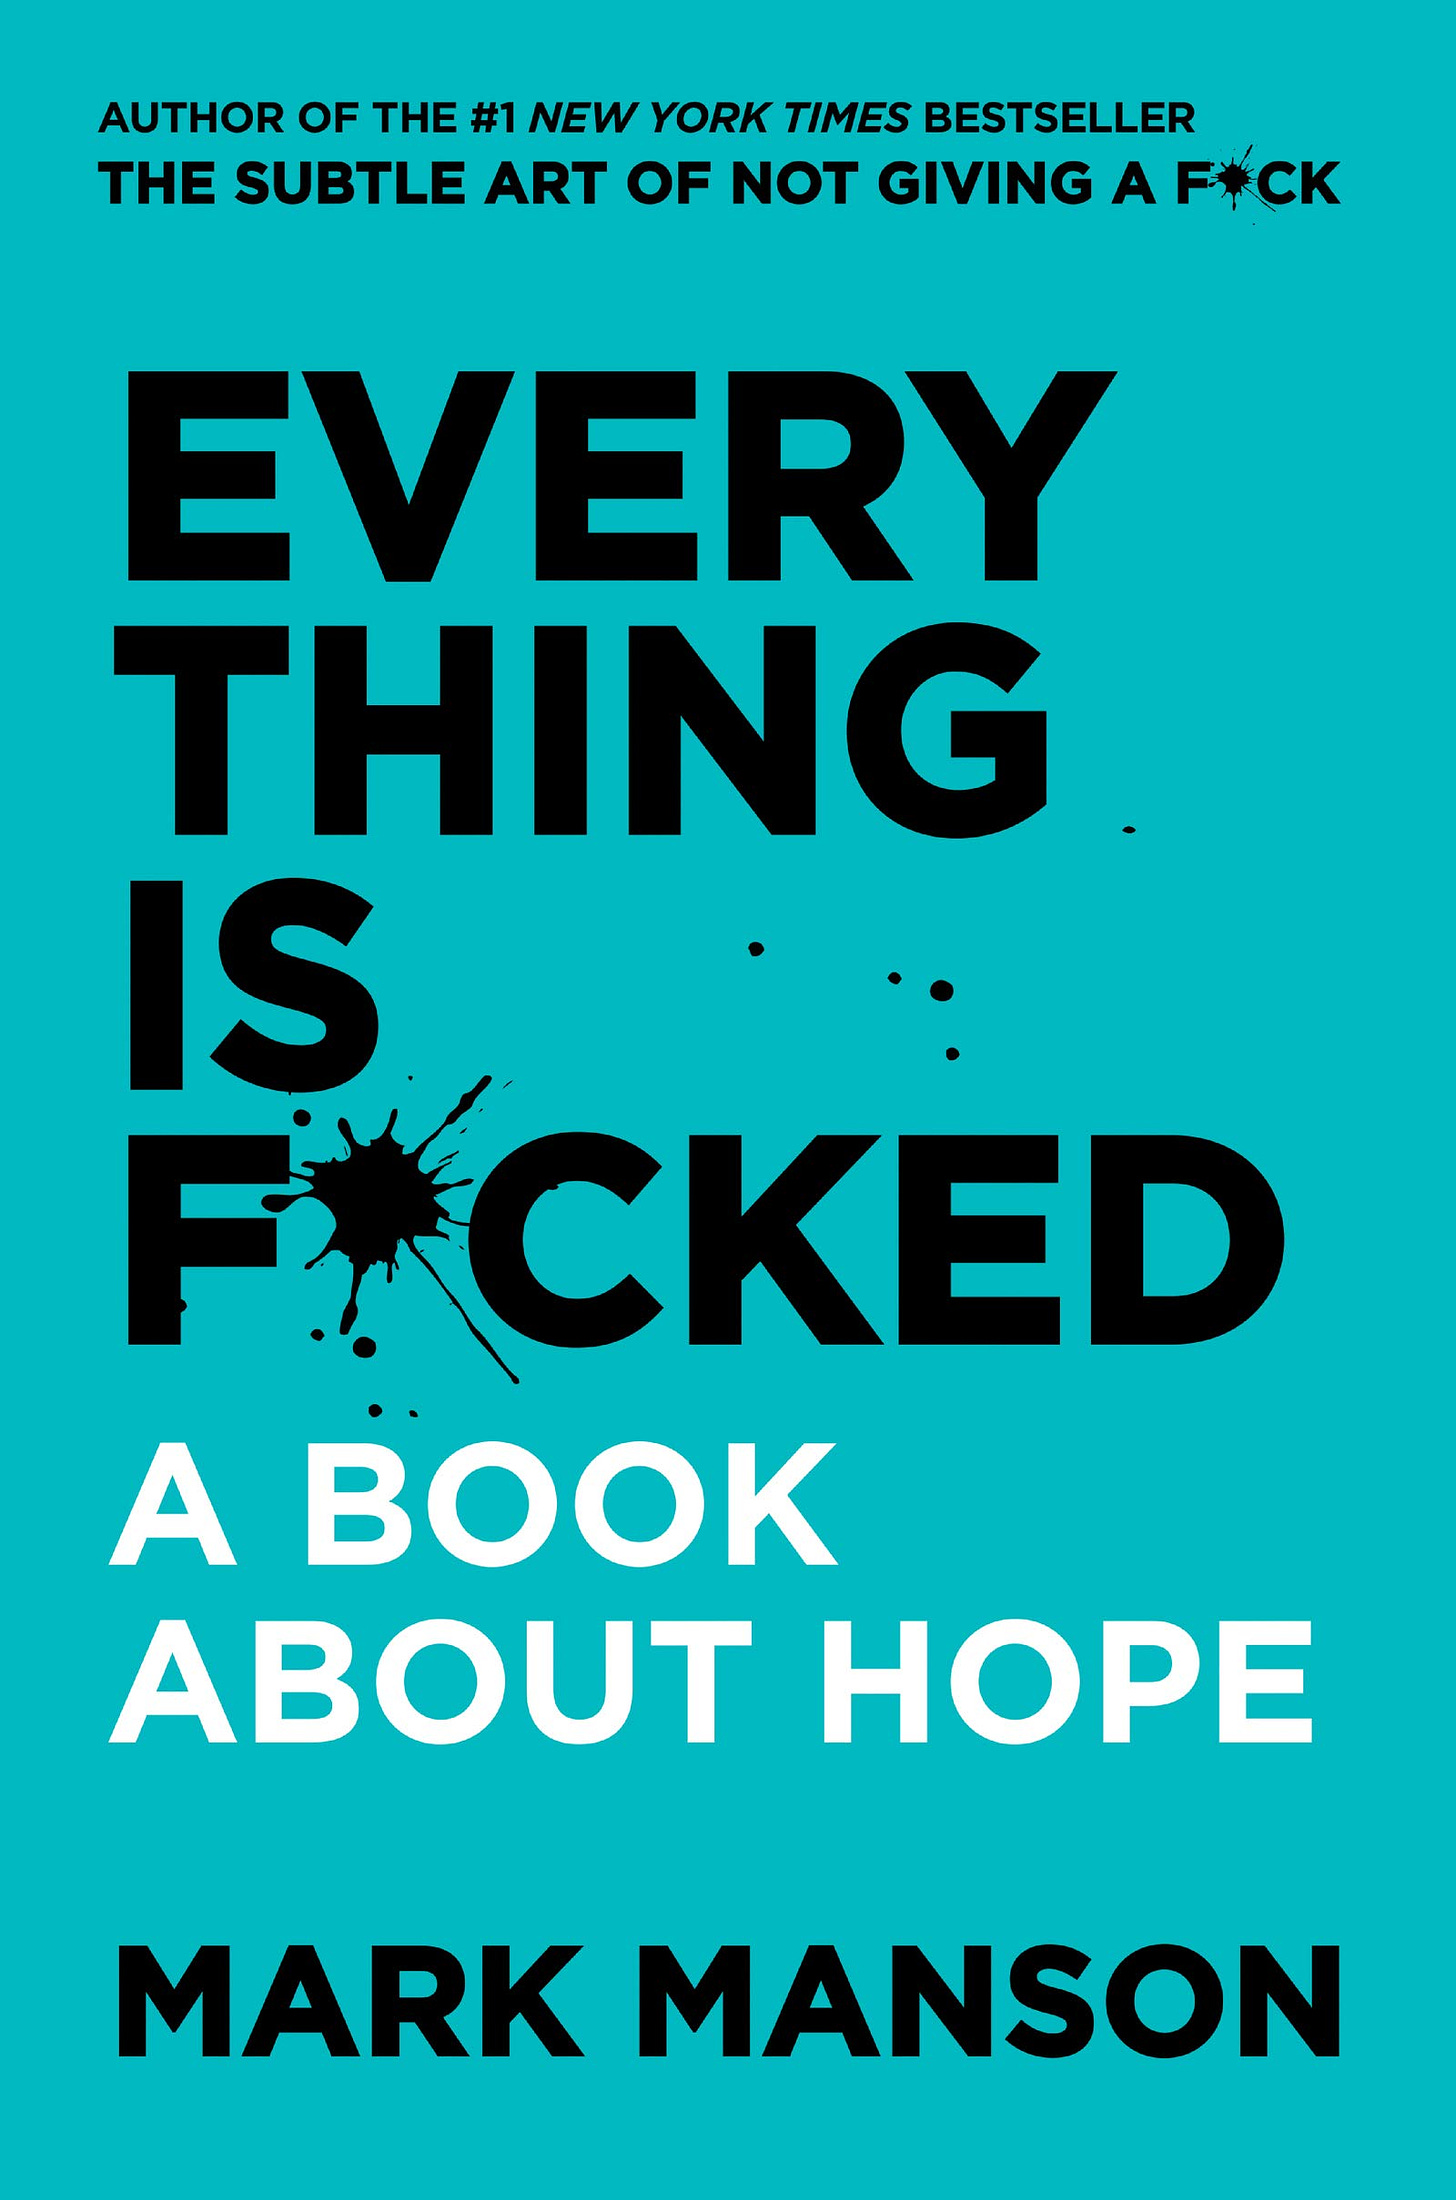 Everything Is F*cked: A Book About Hope (The Subtle Art of Not Giving a  F*ck (2 Book Series)) - Kindle edition by Manson, Mark. Health, Fitness &  Dieting Kindle eBooks @ Amazon.com.